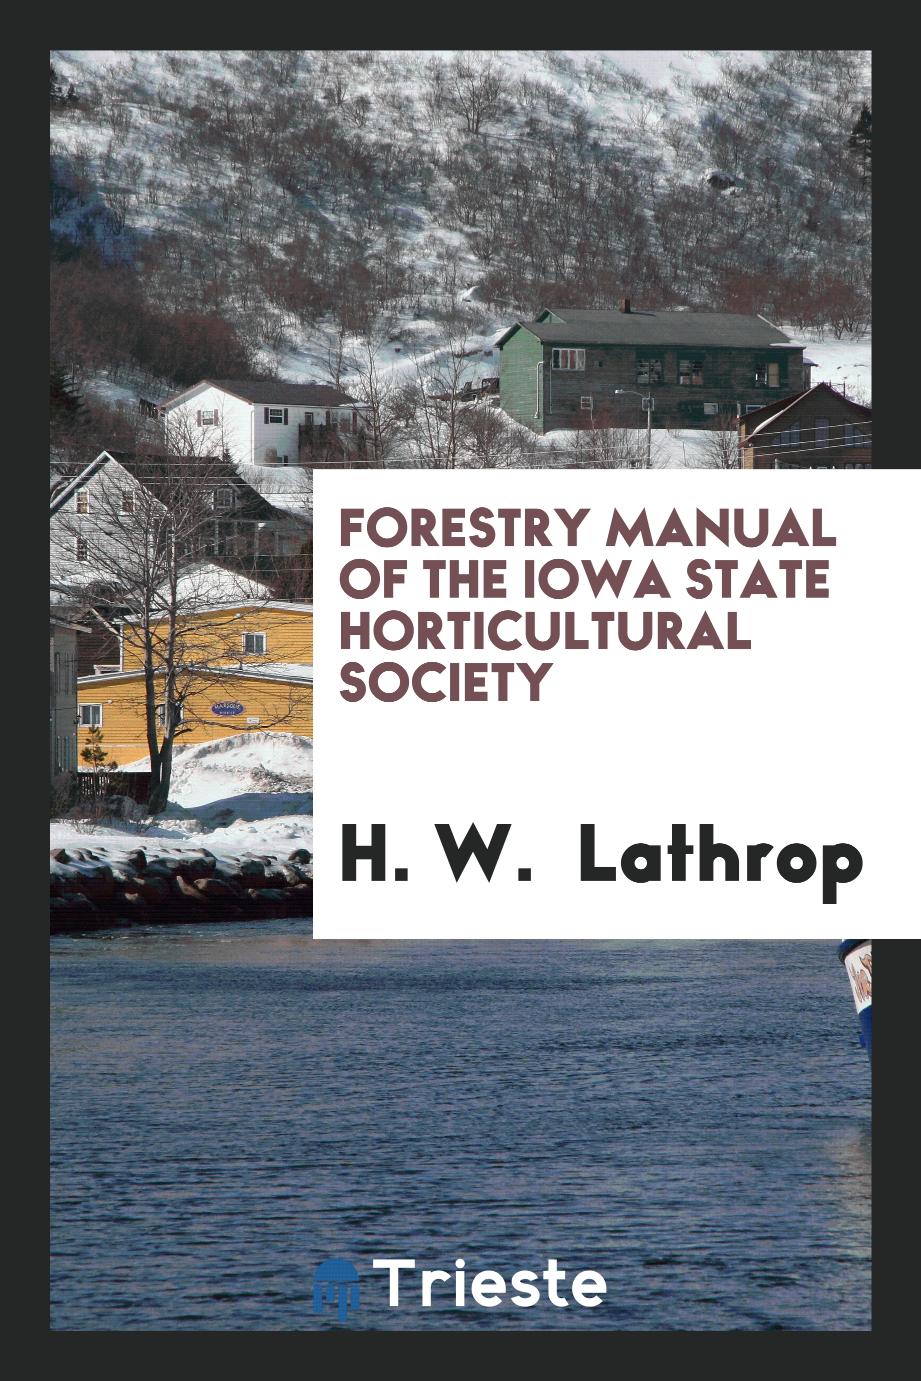 Forestry Manual of the Iowa State Horticultural Society